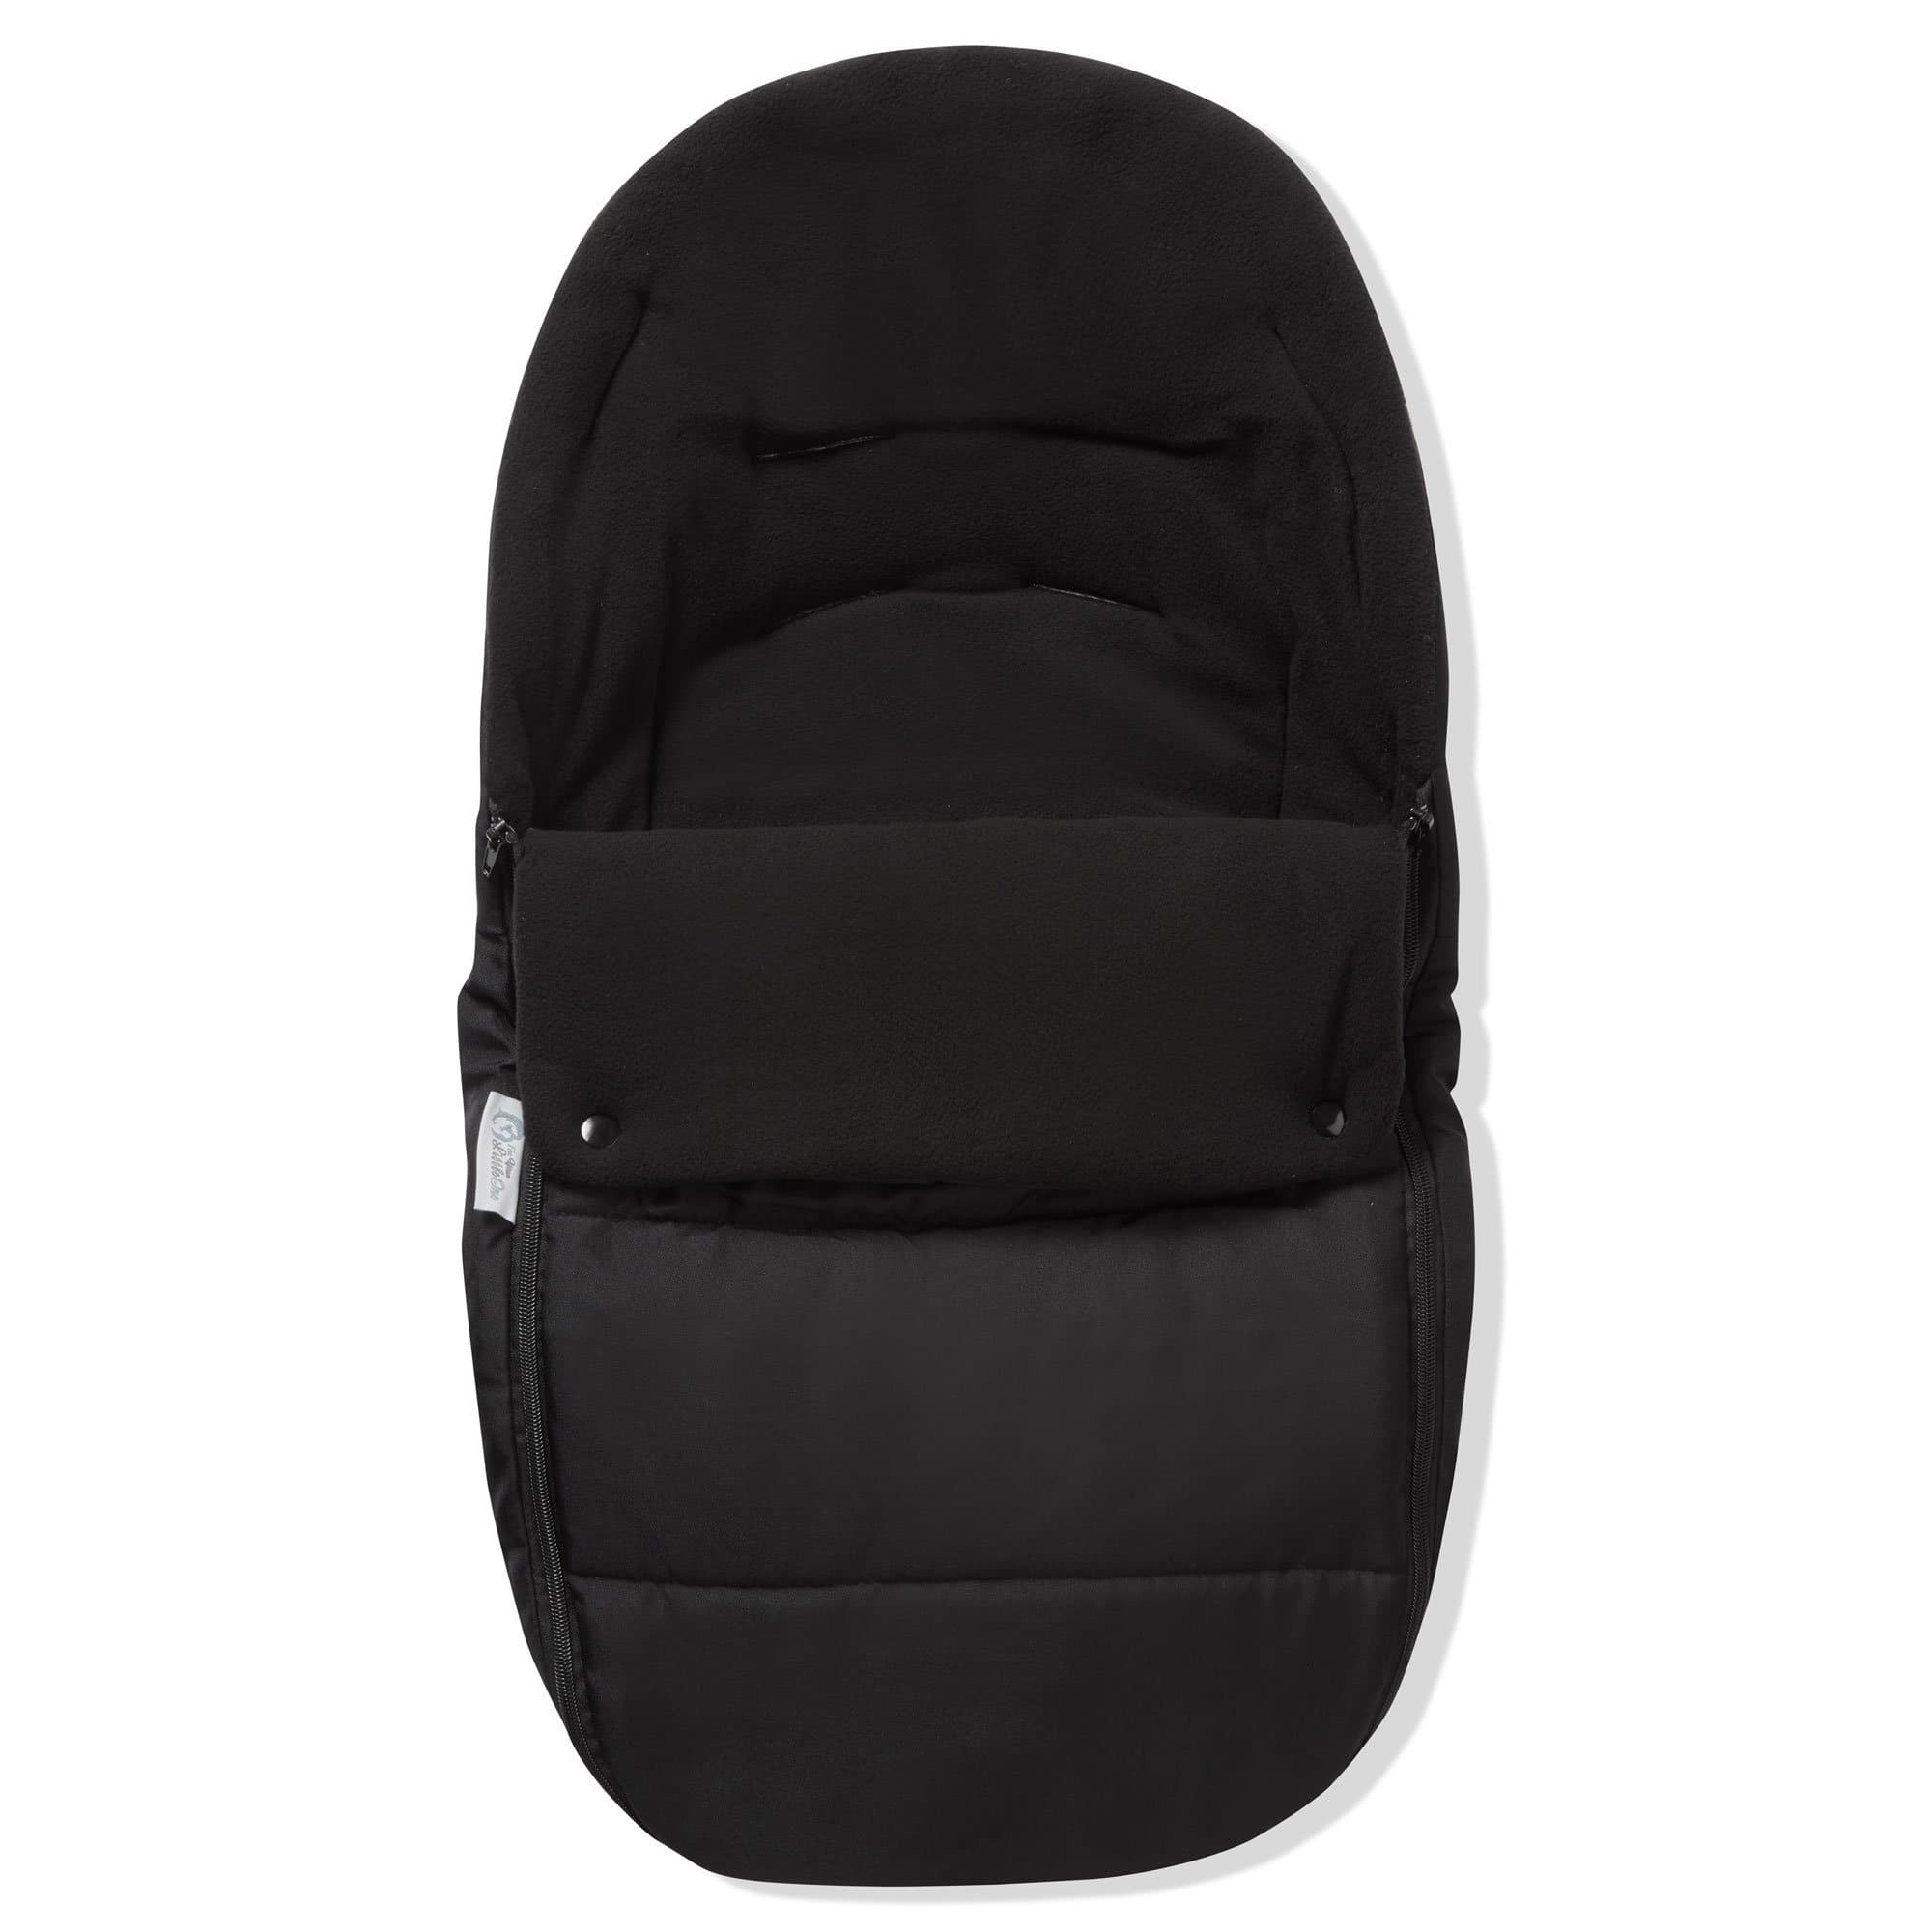 Premium Car Seat Footmuff / Cosy Toes Compatible with Babystyle - Black Jack / Fits All Models | For Your Little One